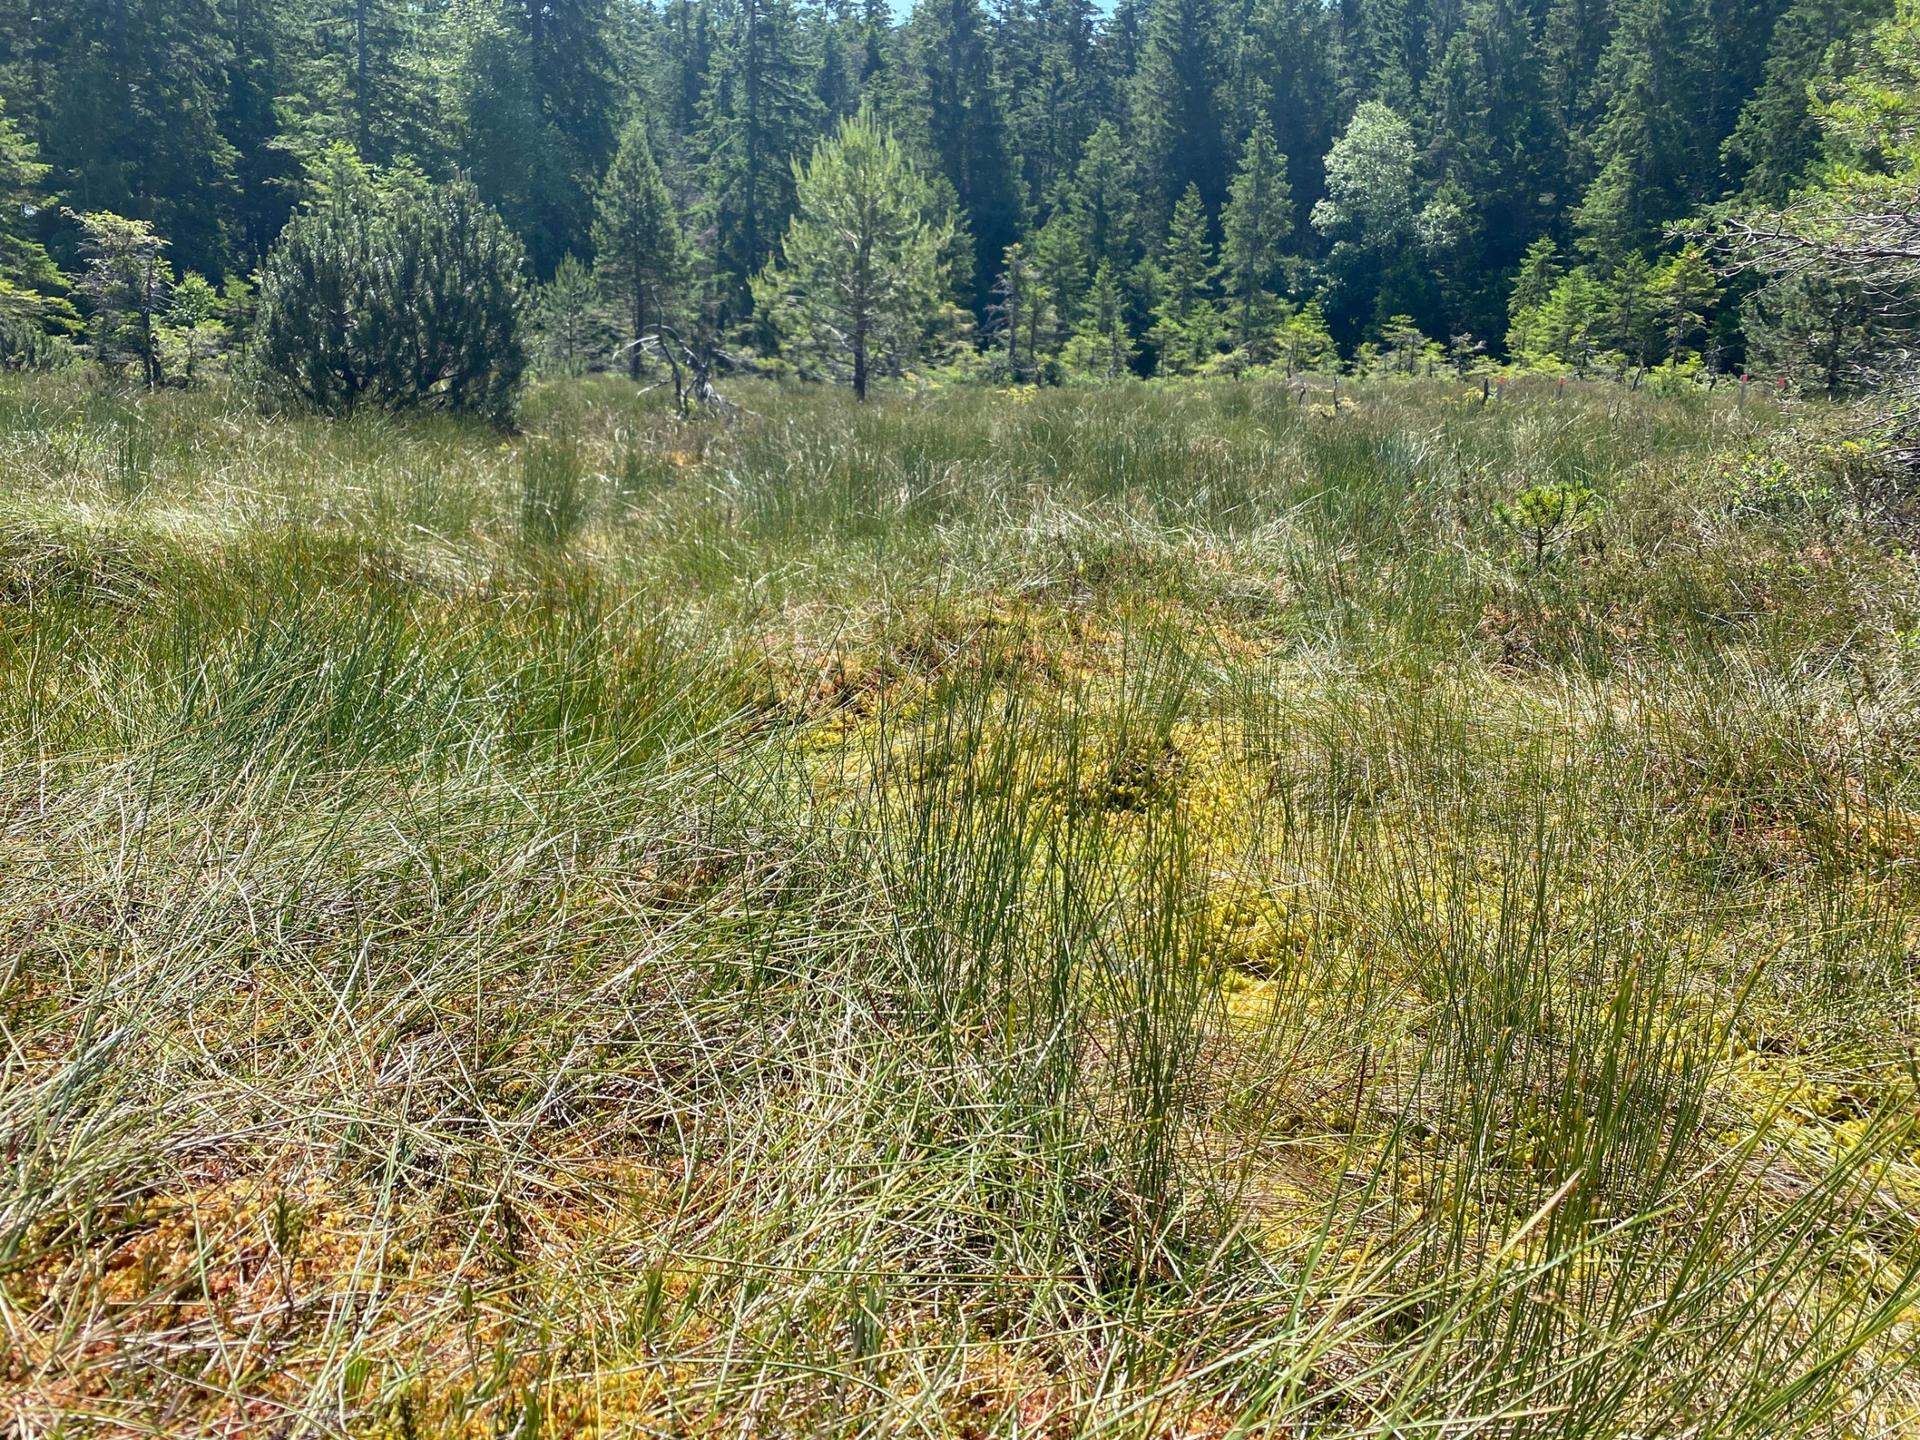 This bog in the Kohlhütte nature reserve has a low water level, and the dry conditions are contributing to a loss of species.